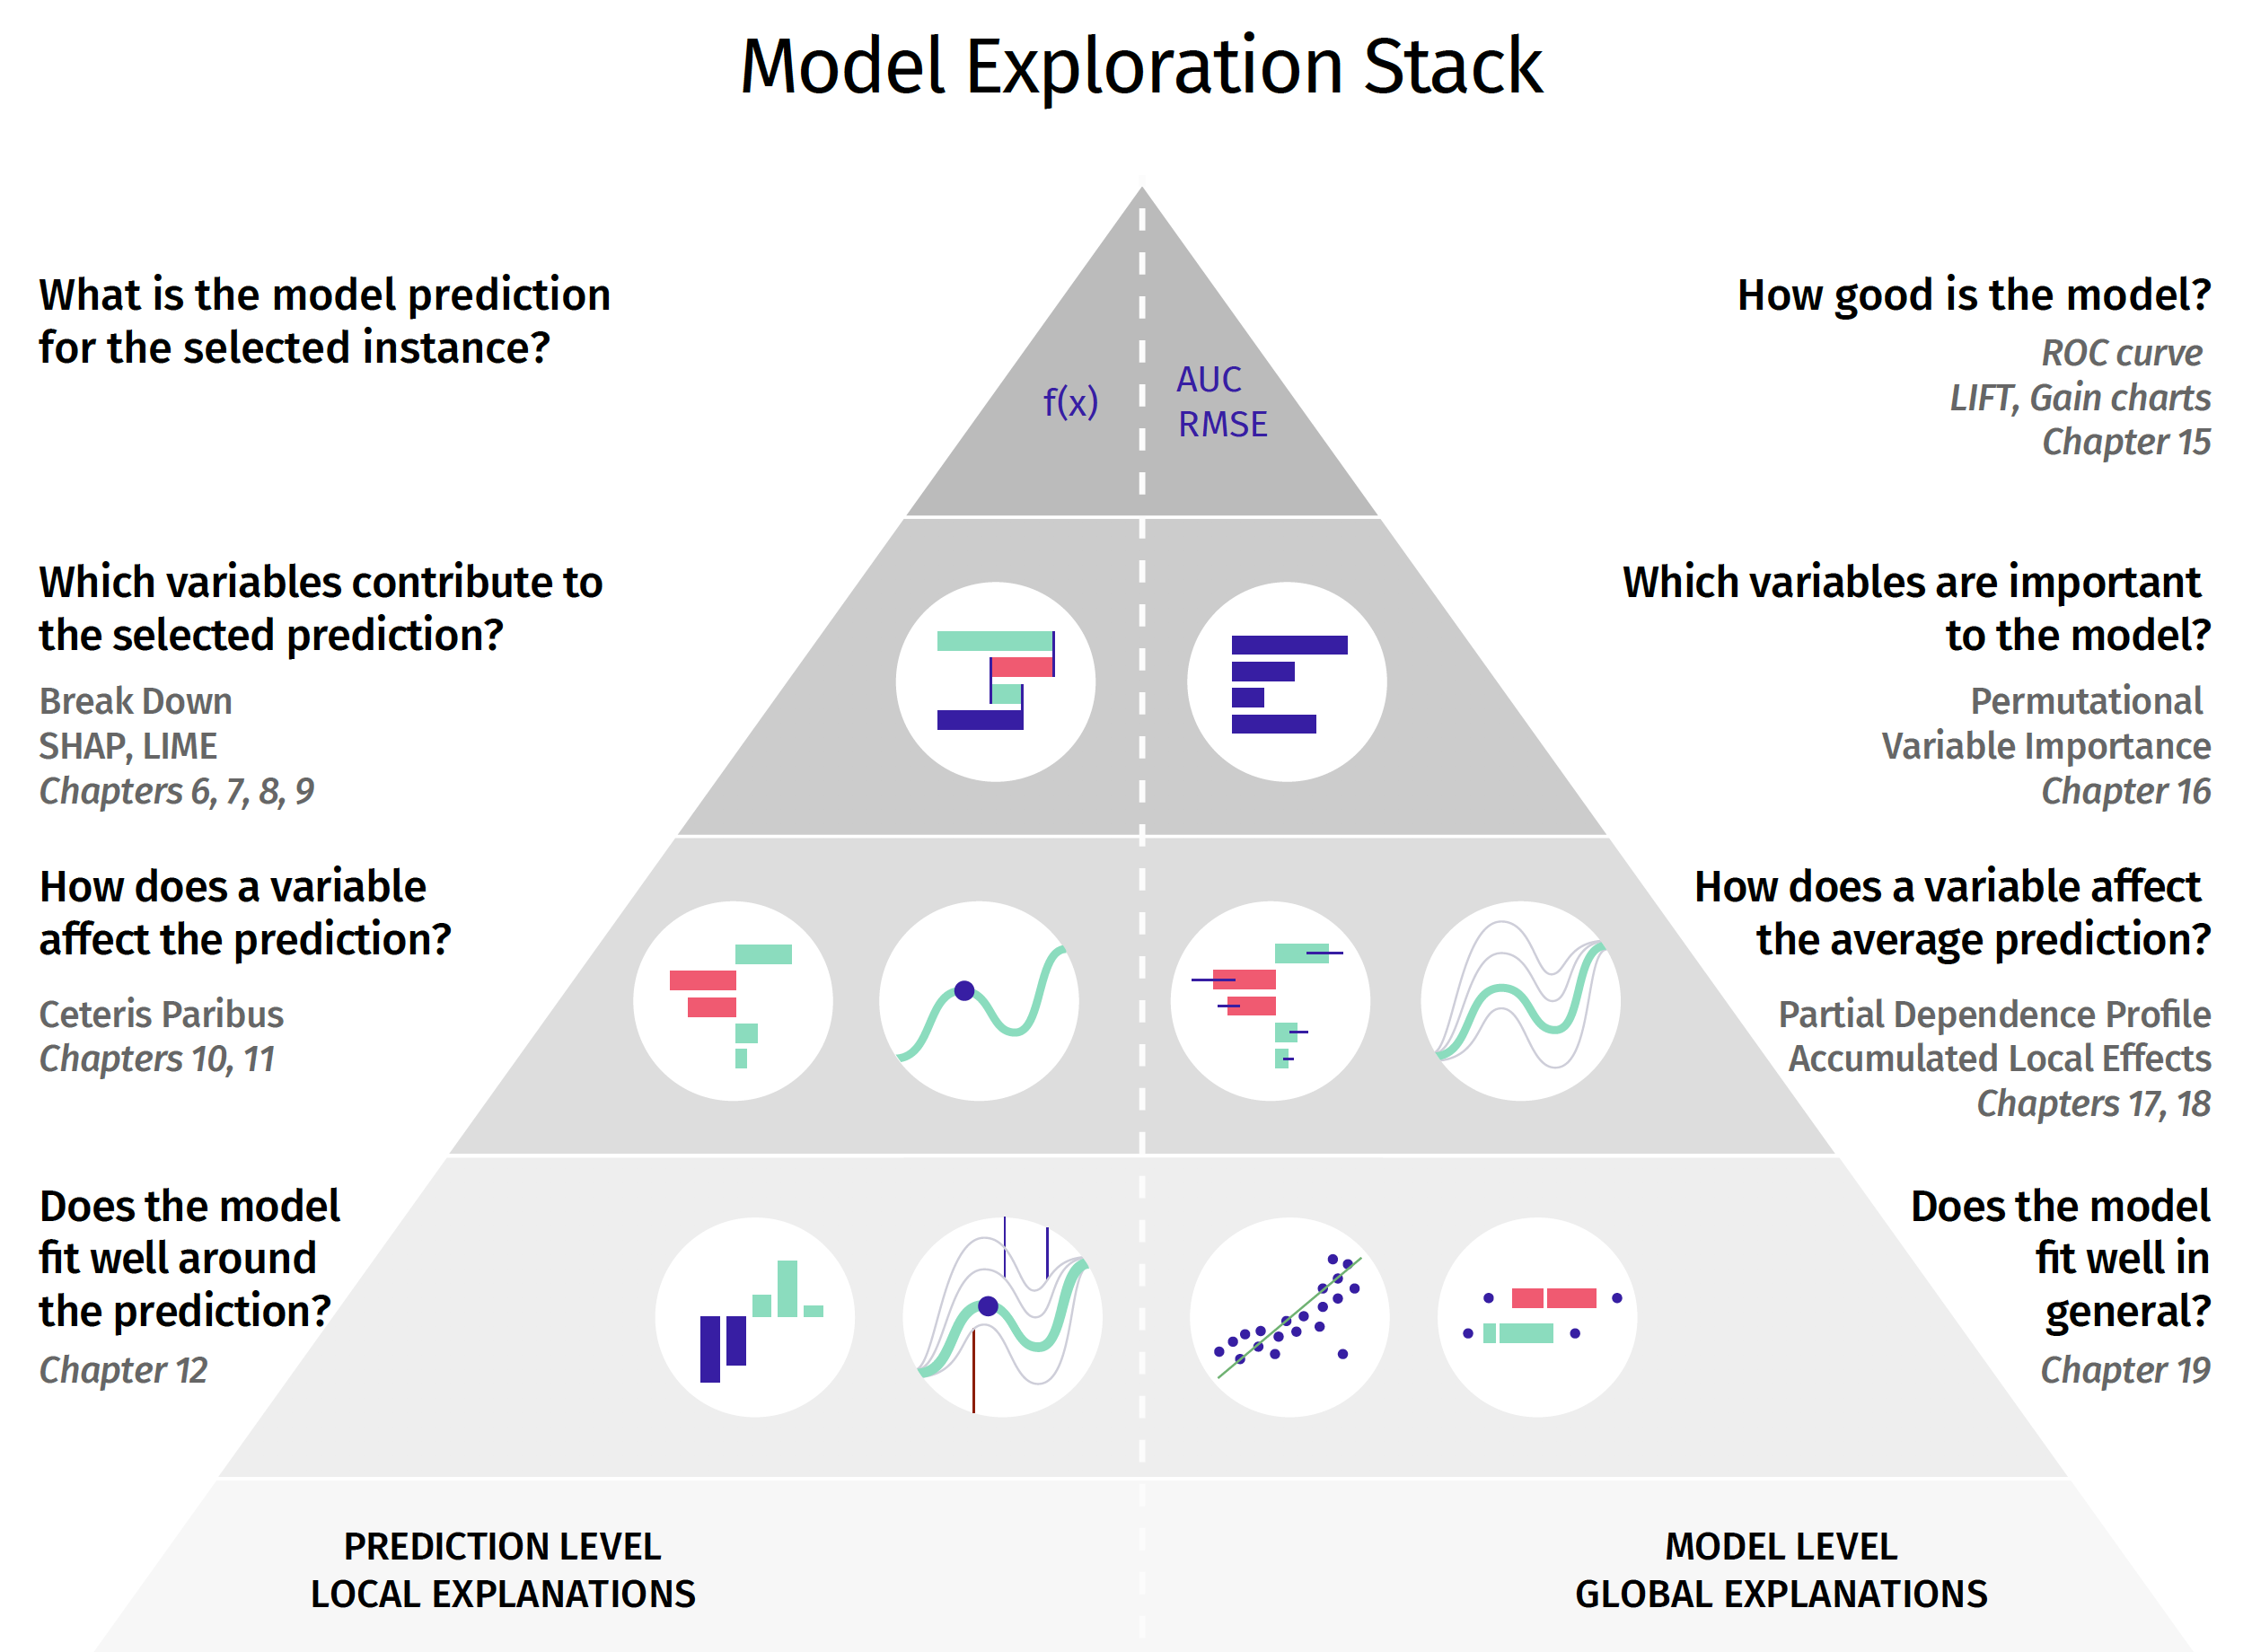 Model exploration methods presented in the book. The left-hand side (corresponding to the second part of the book) focuses on instance-level exploration, while the right-hand side (corresponding to the third part of the book) focuses on dataset-level exploration. Consecutive layers of the stack are linked with a deeper level of model exploration. The layers are linked with laws of model exploration introduced in Section 1.2.